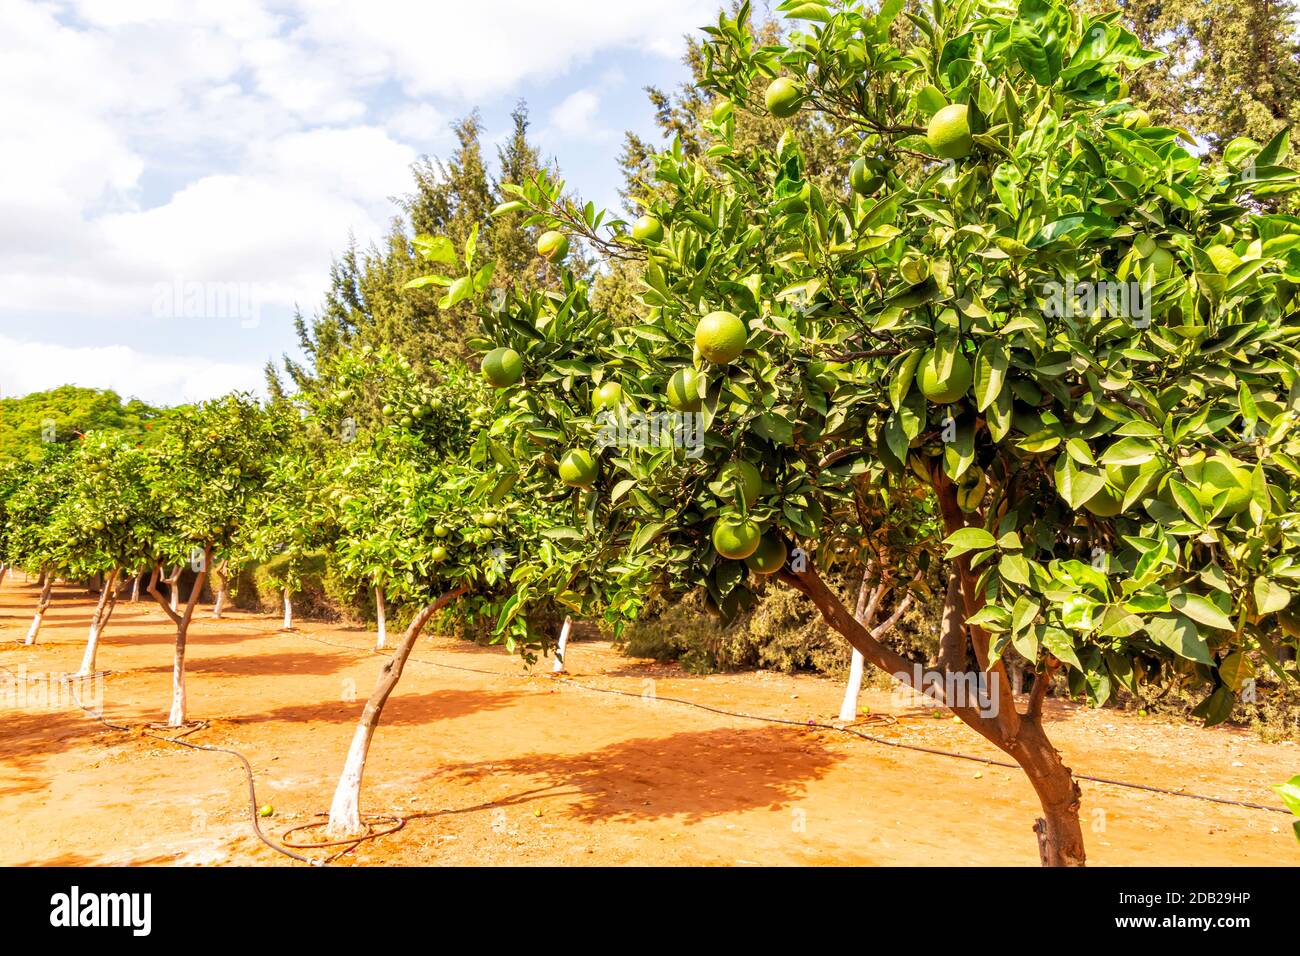 Rows of orange trees in a city orchard against a blue sky with clouds. Israel Stock Photo